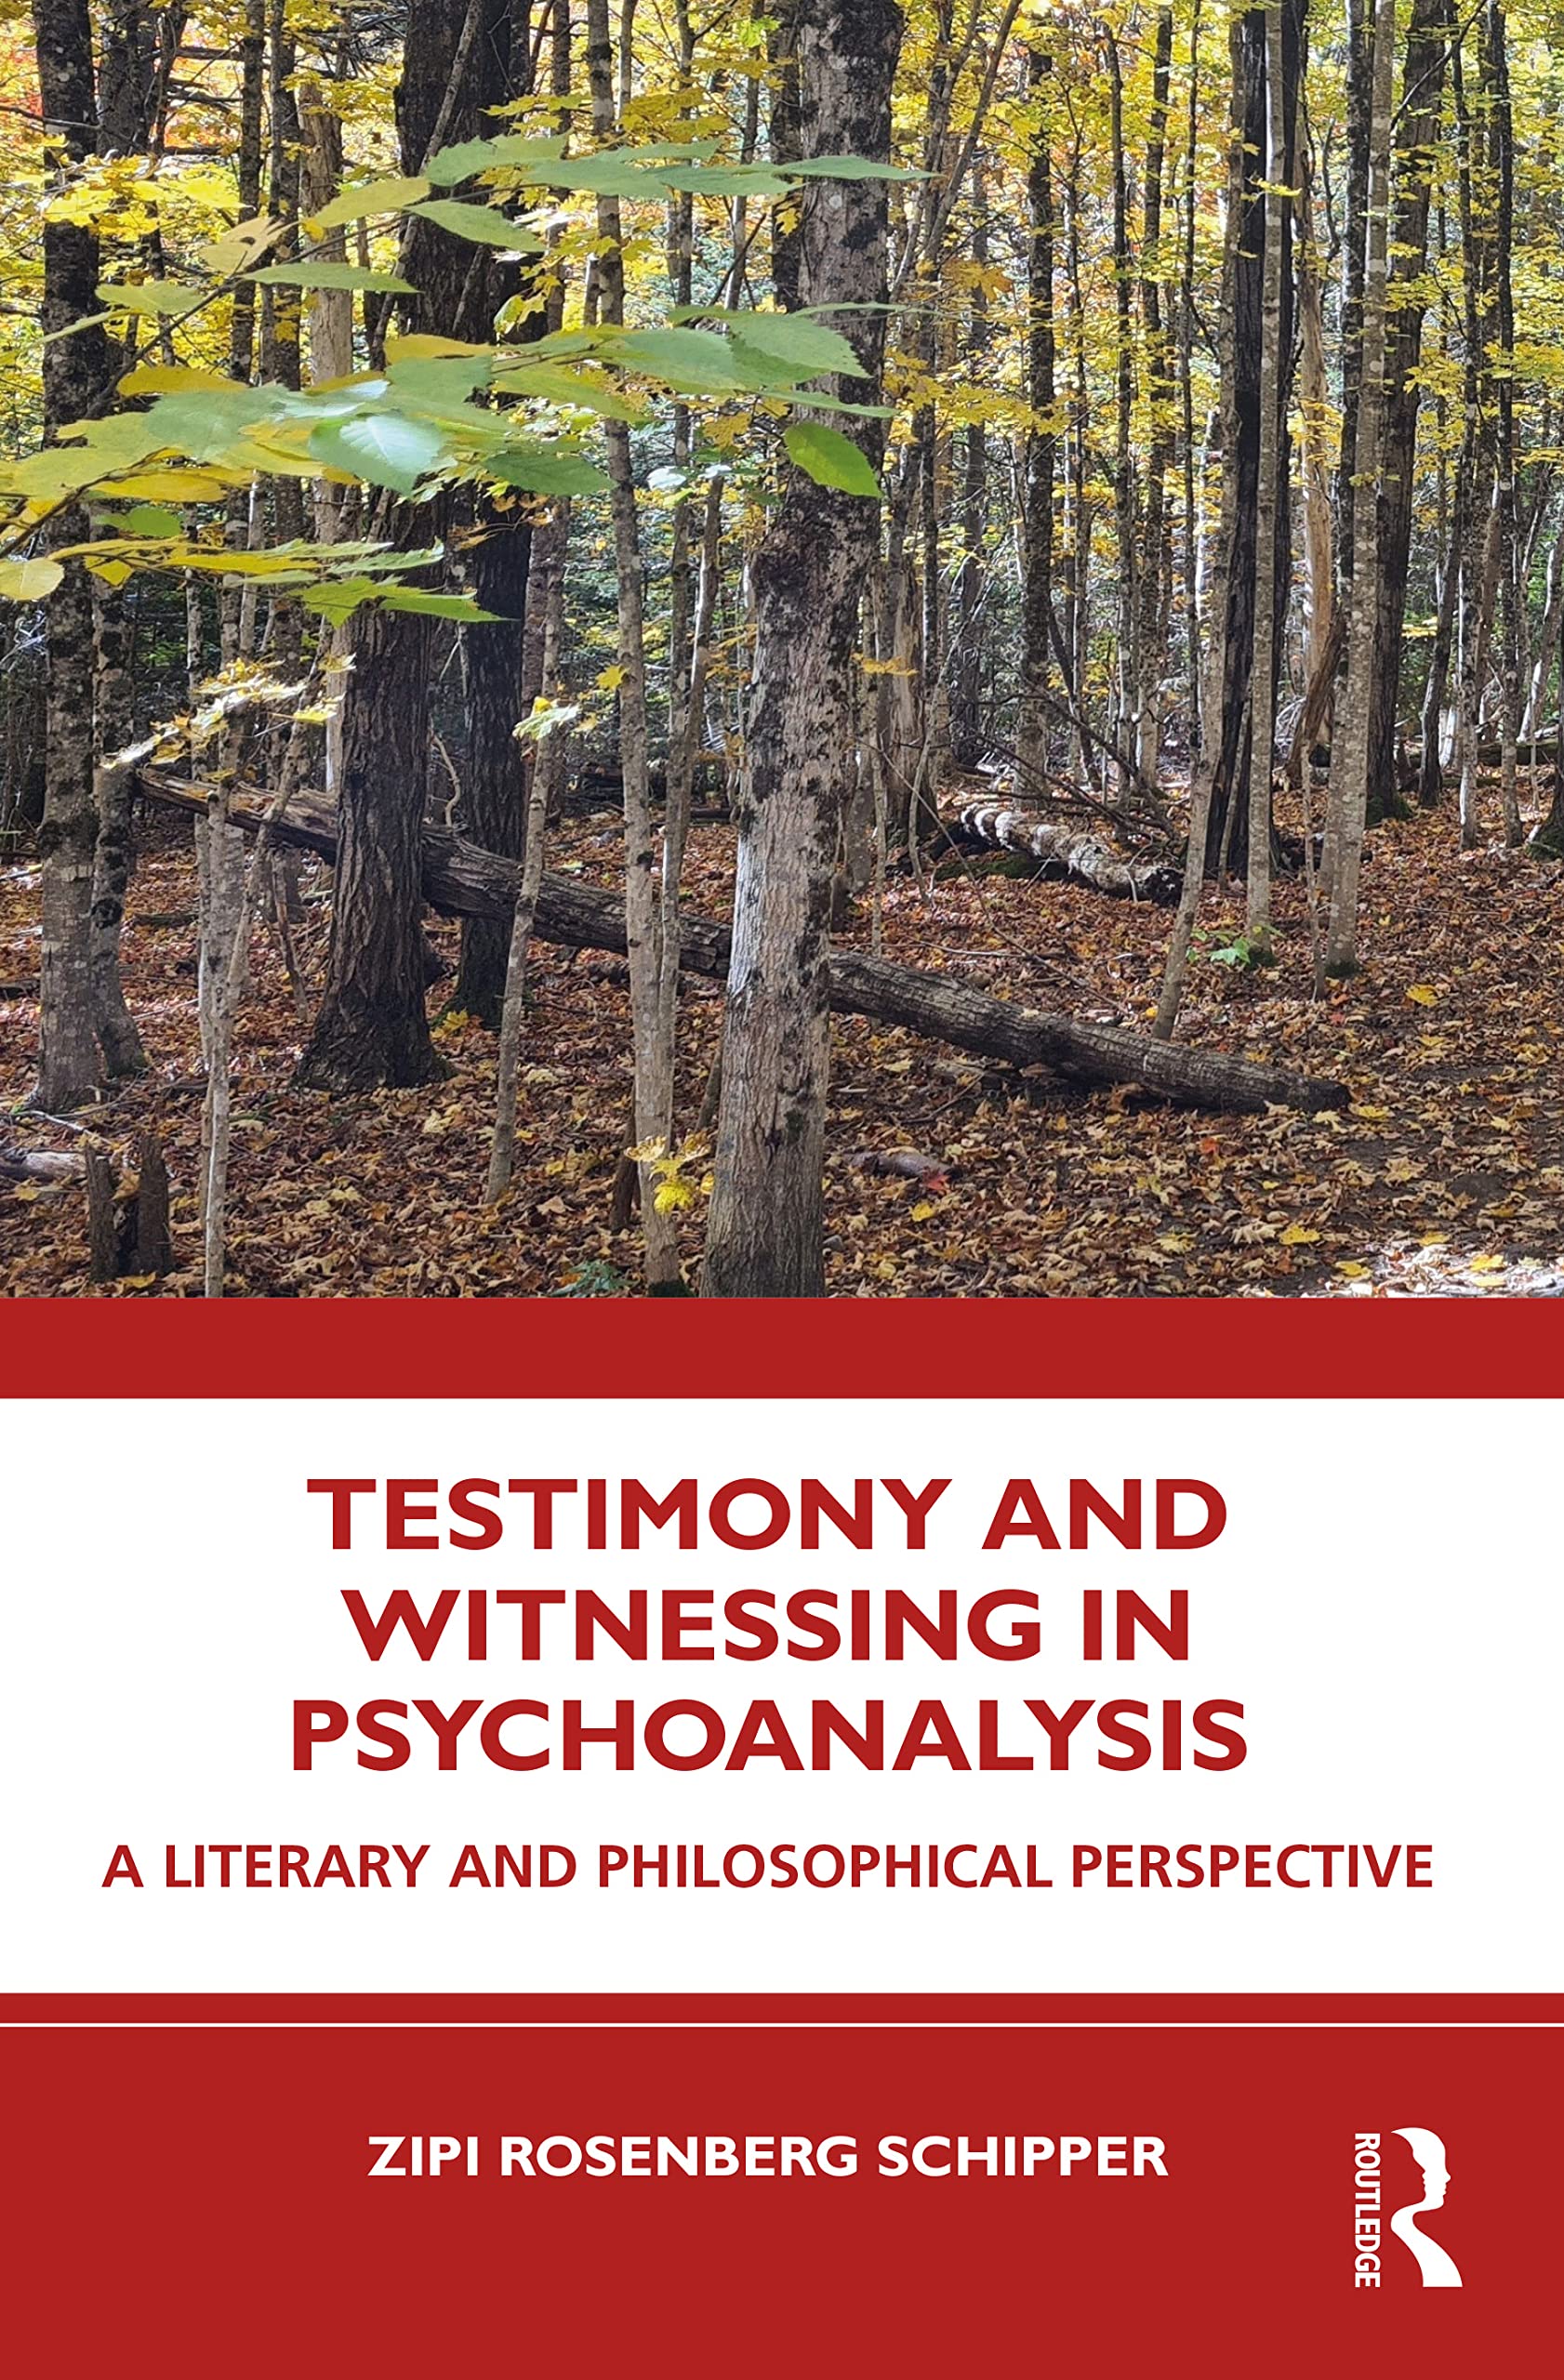 Testimony and Witnessing in Psychoanalysis: A Literary and Philosophical Perspective